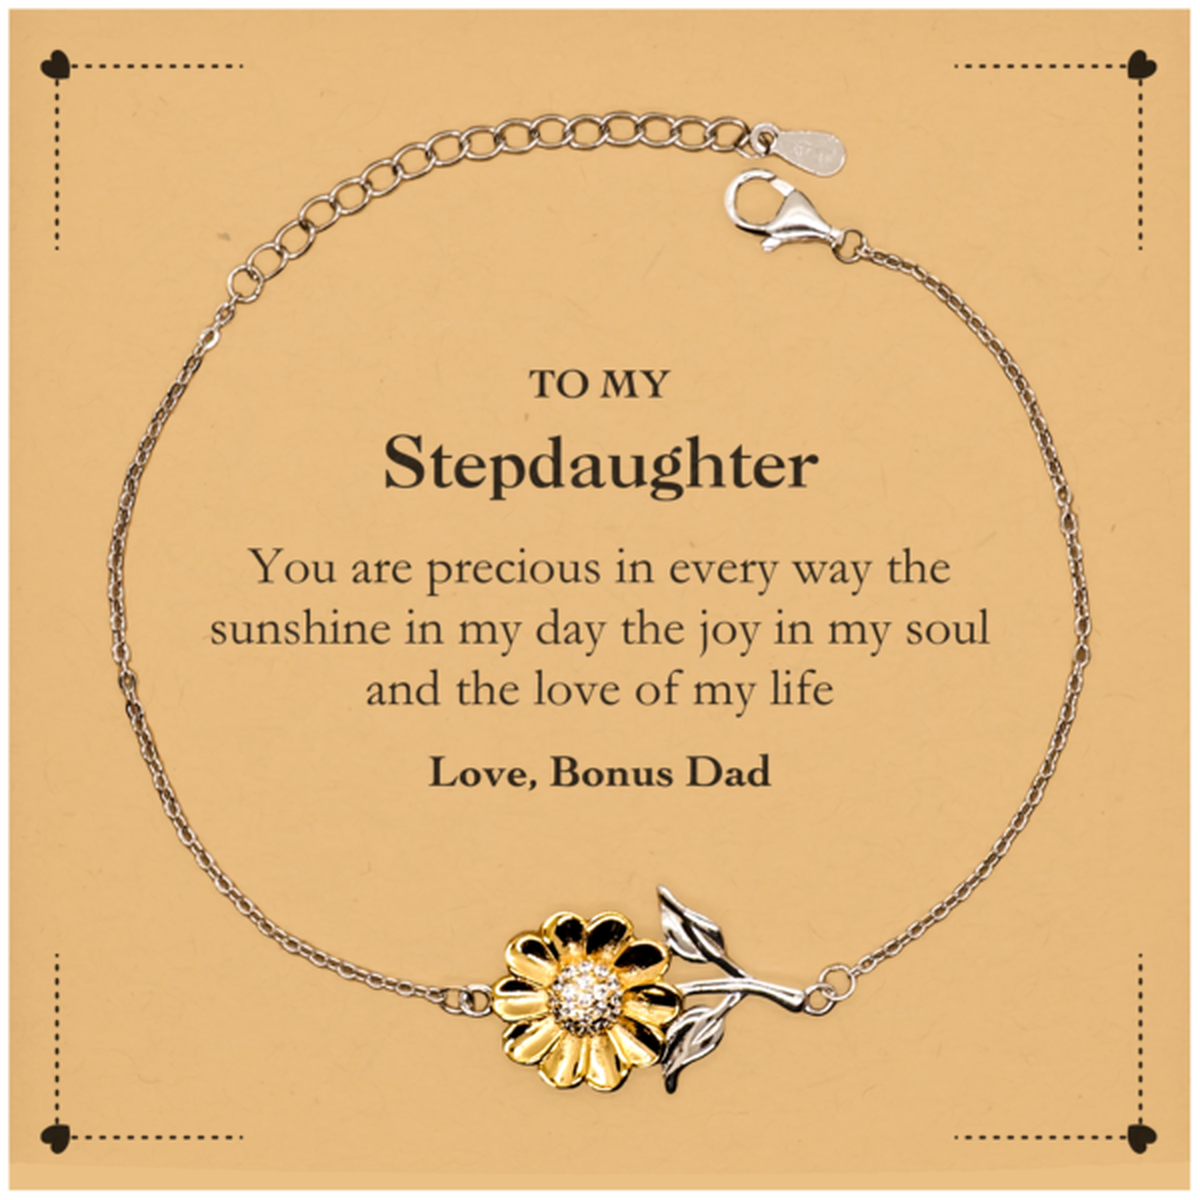 Graduation Gifts for Stepdaughter Sunflower Bracelet Present from Bonus Dad, Christmas Stepdaughter Birthday Gifts Stepdaughter You are precious in every way the sunshine in my day. Love, Bonus Dad